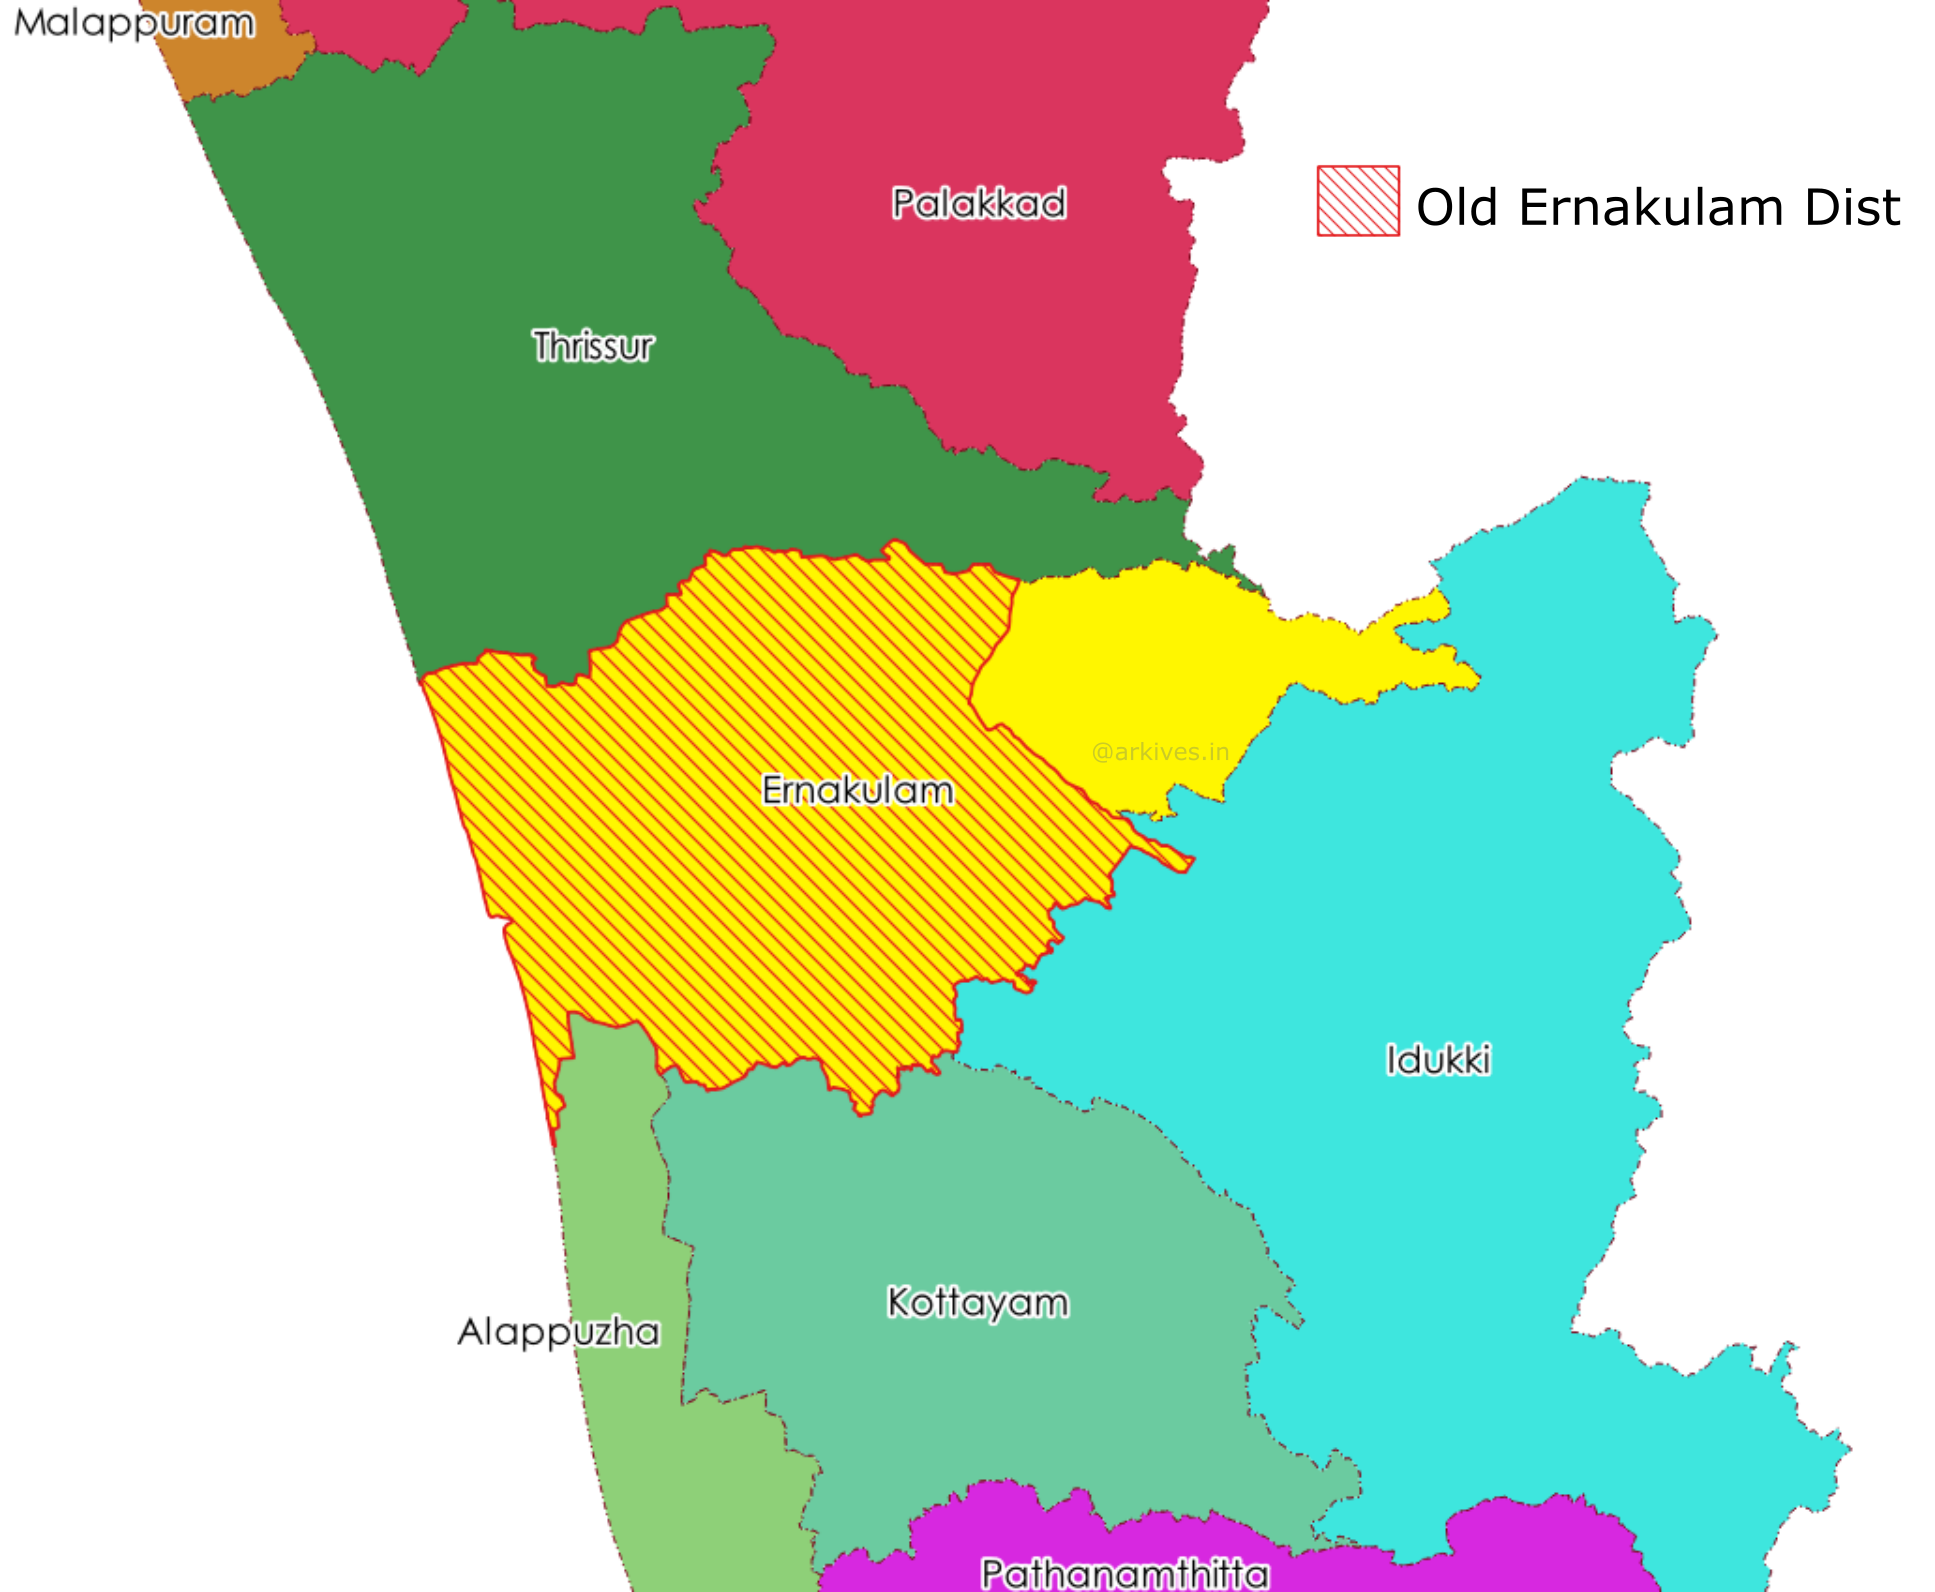 Old Ernakulam district boundary is hatched in red and overlayed on new map